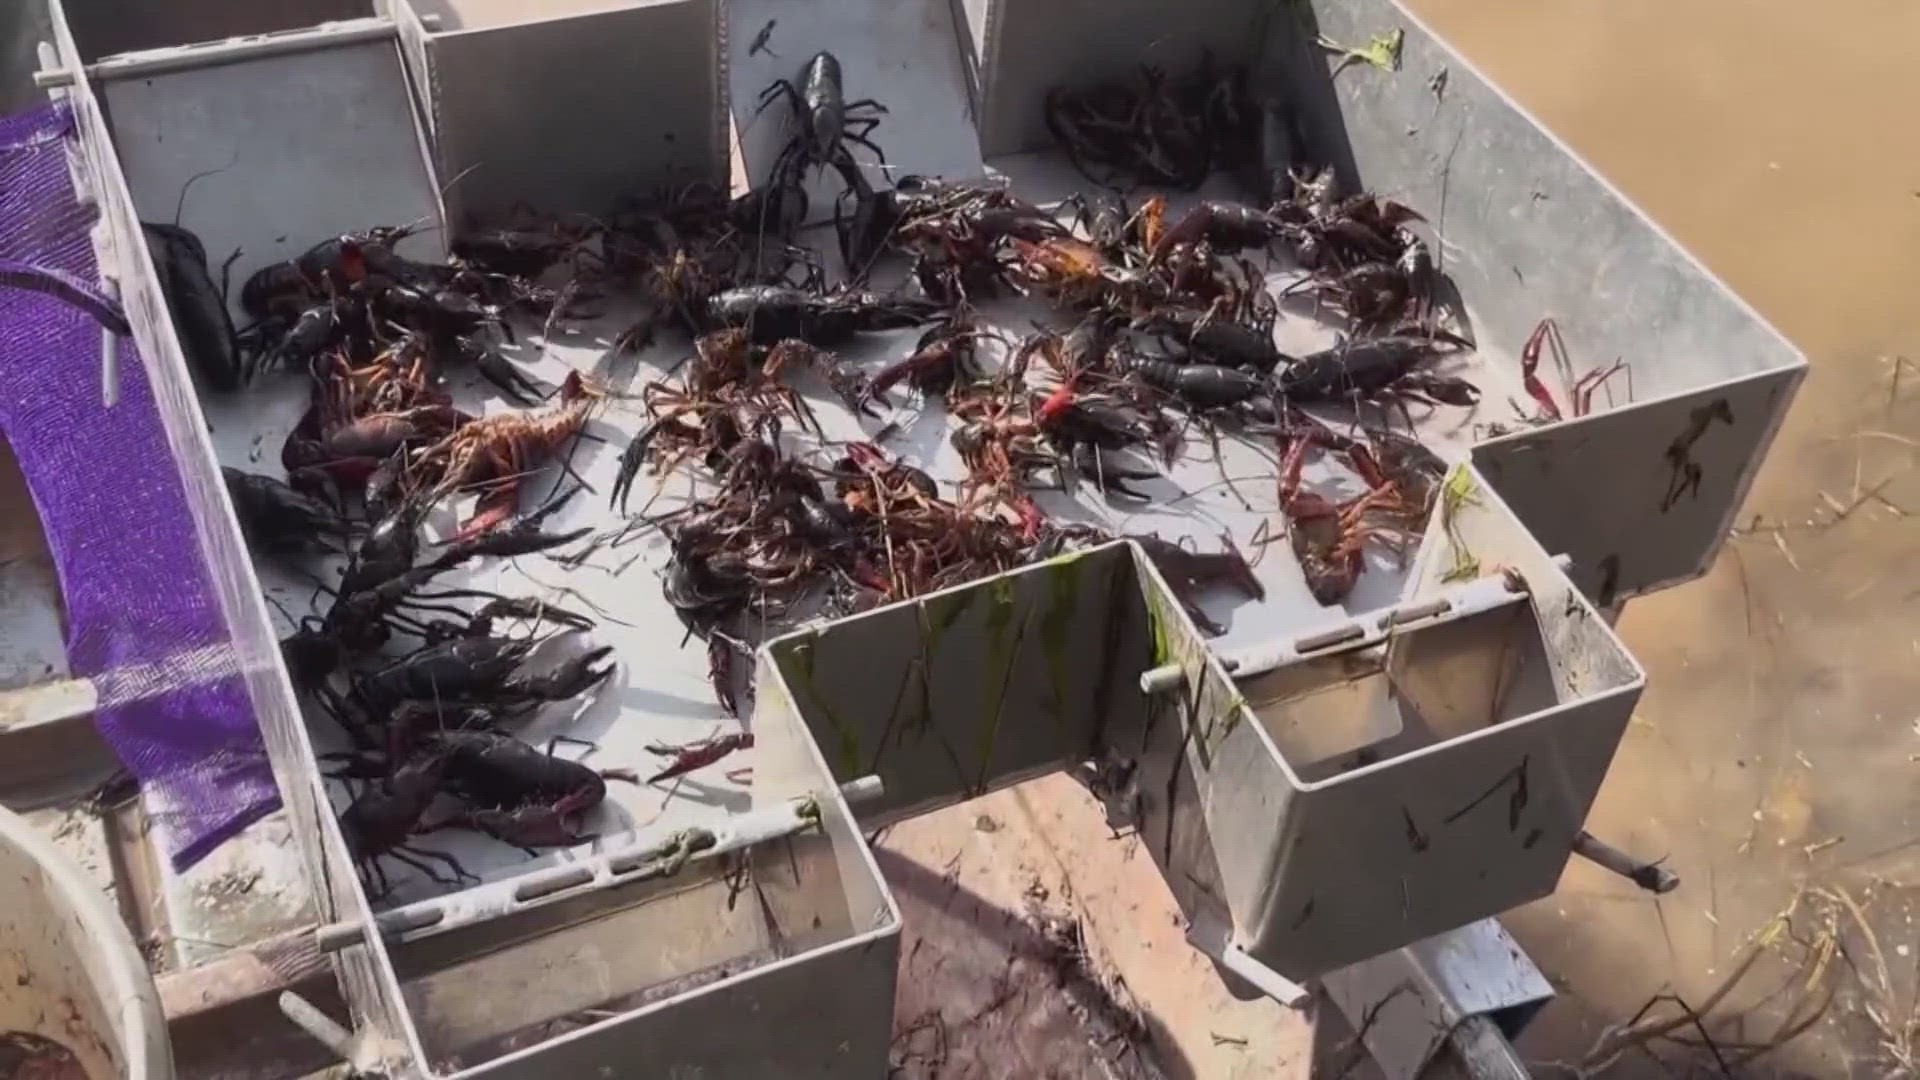 Seafood lovers here in the South are facing a big problem. There's a serious shortage of crawfish and that's driving the price up.